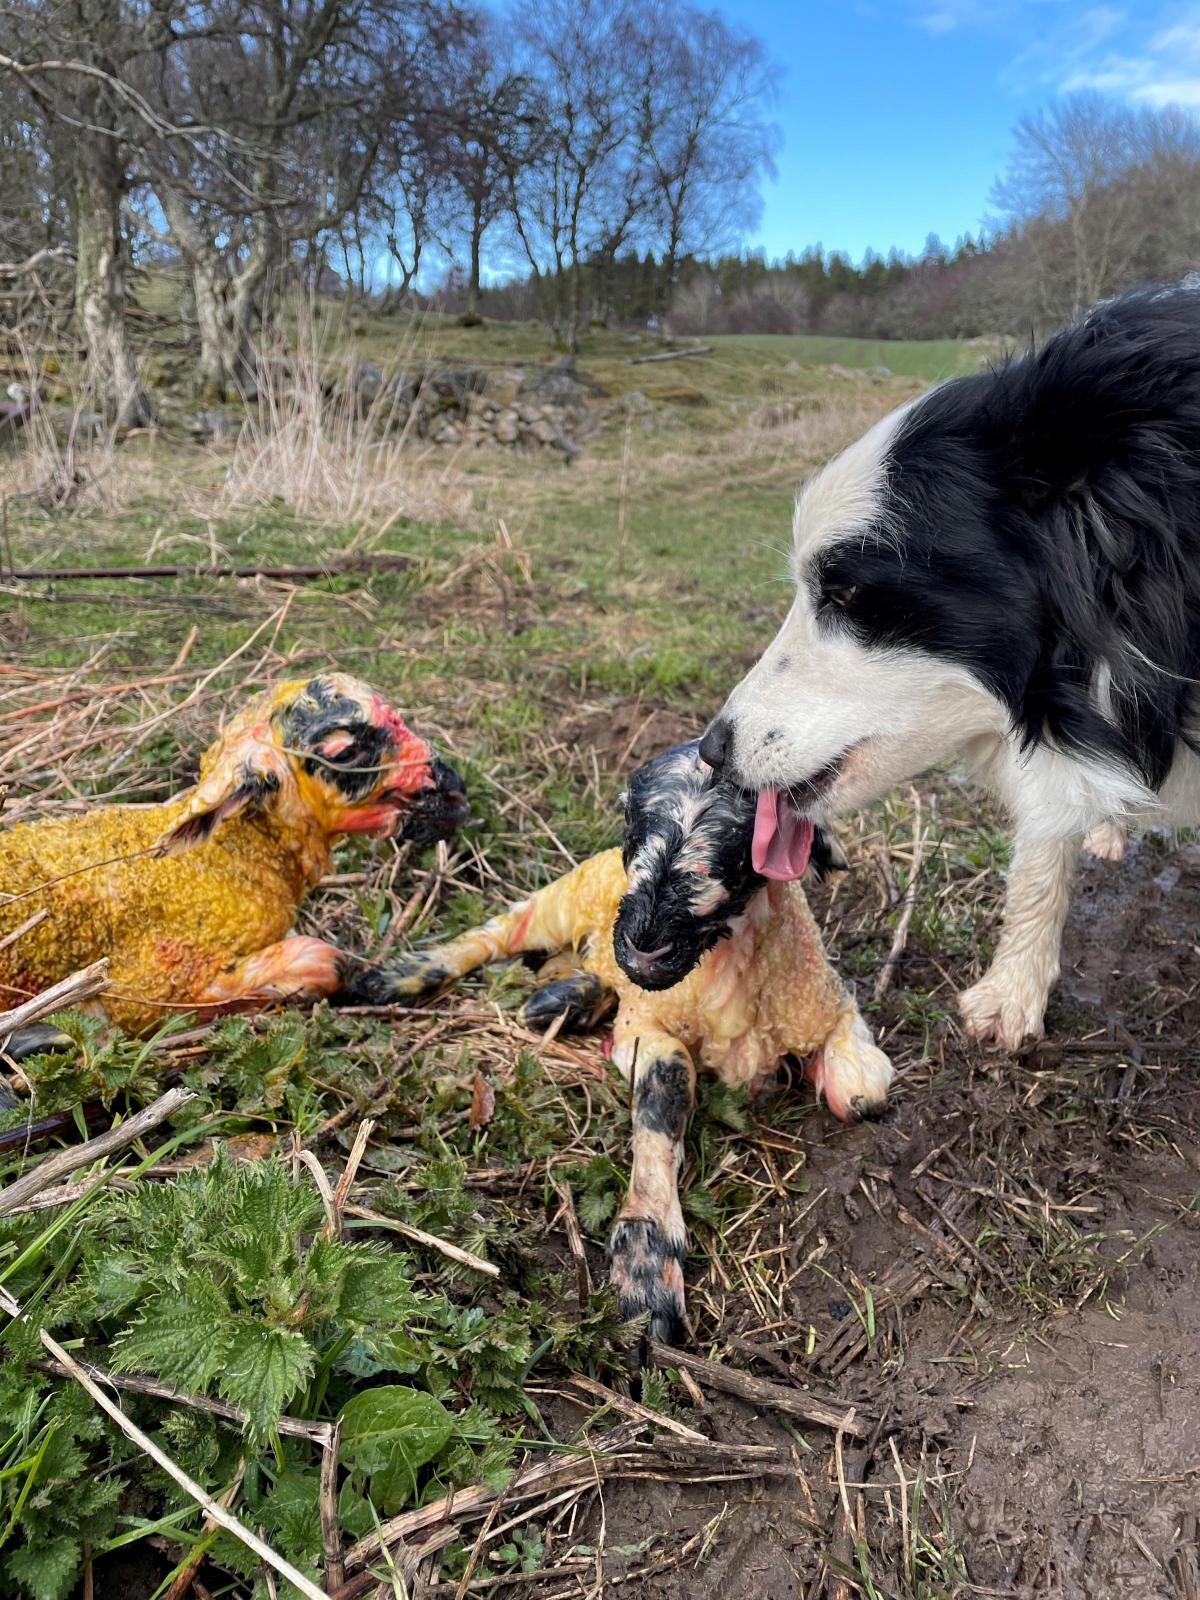 Catherine Smith - Here's my pic of my collie Jill, 'kissing' a lamb